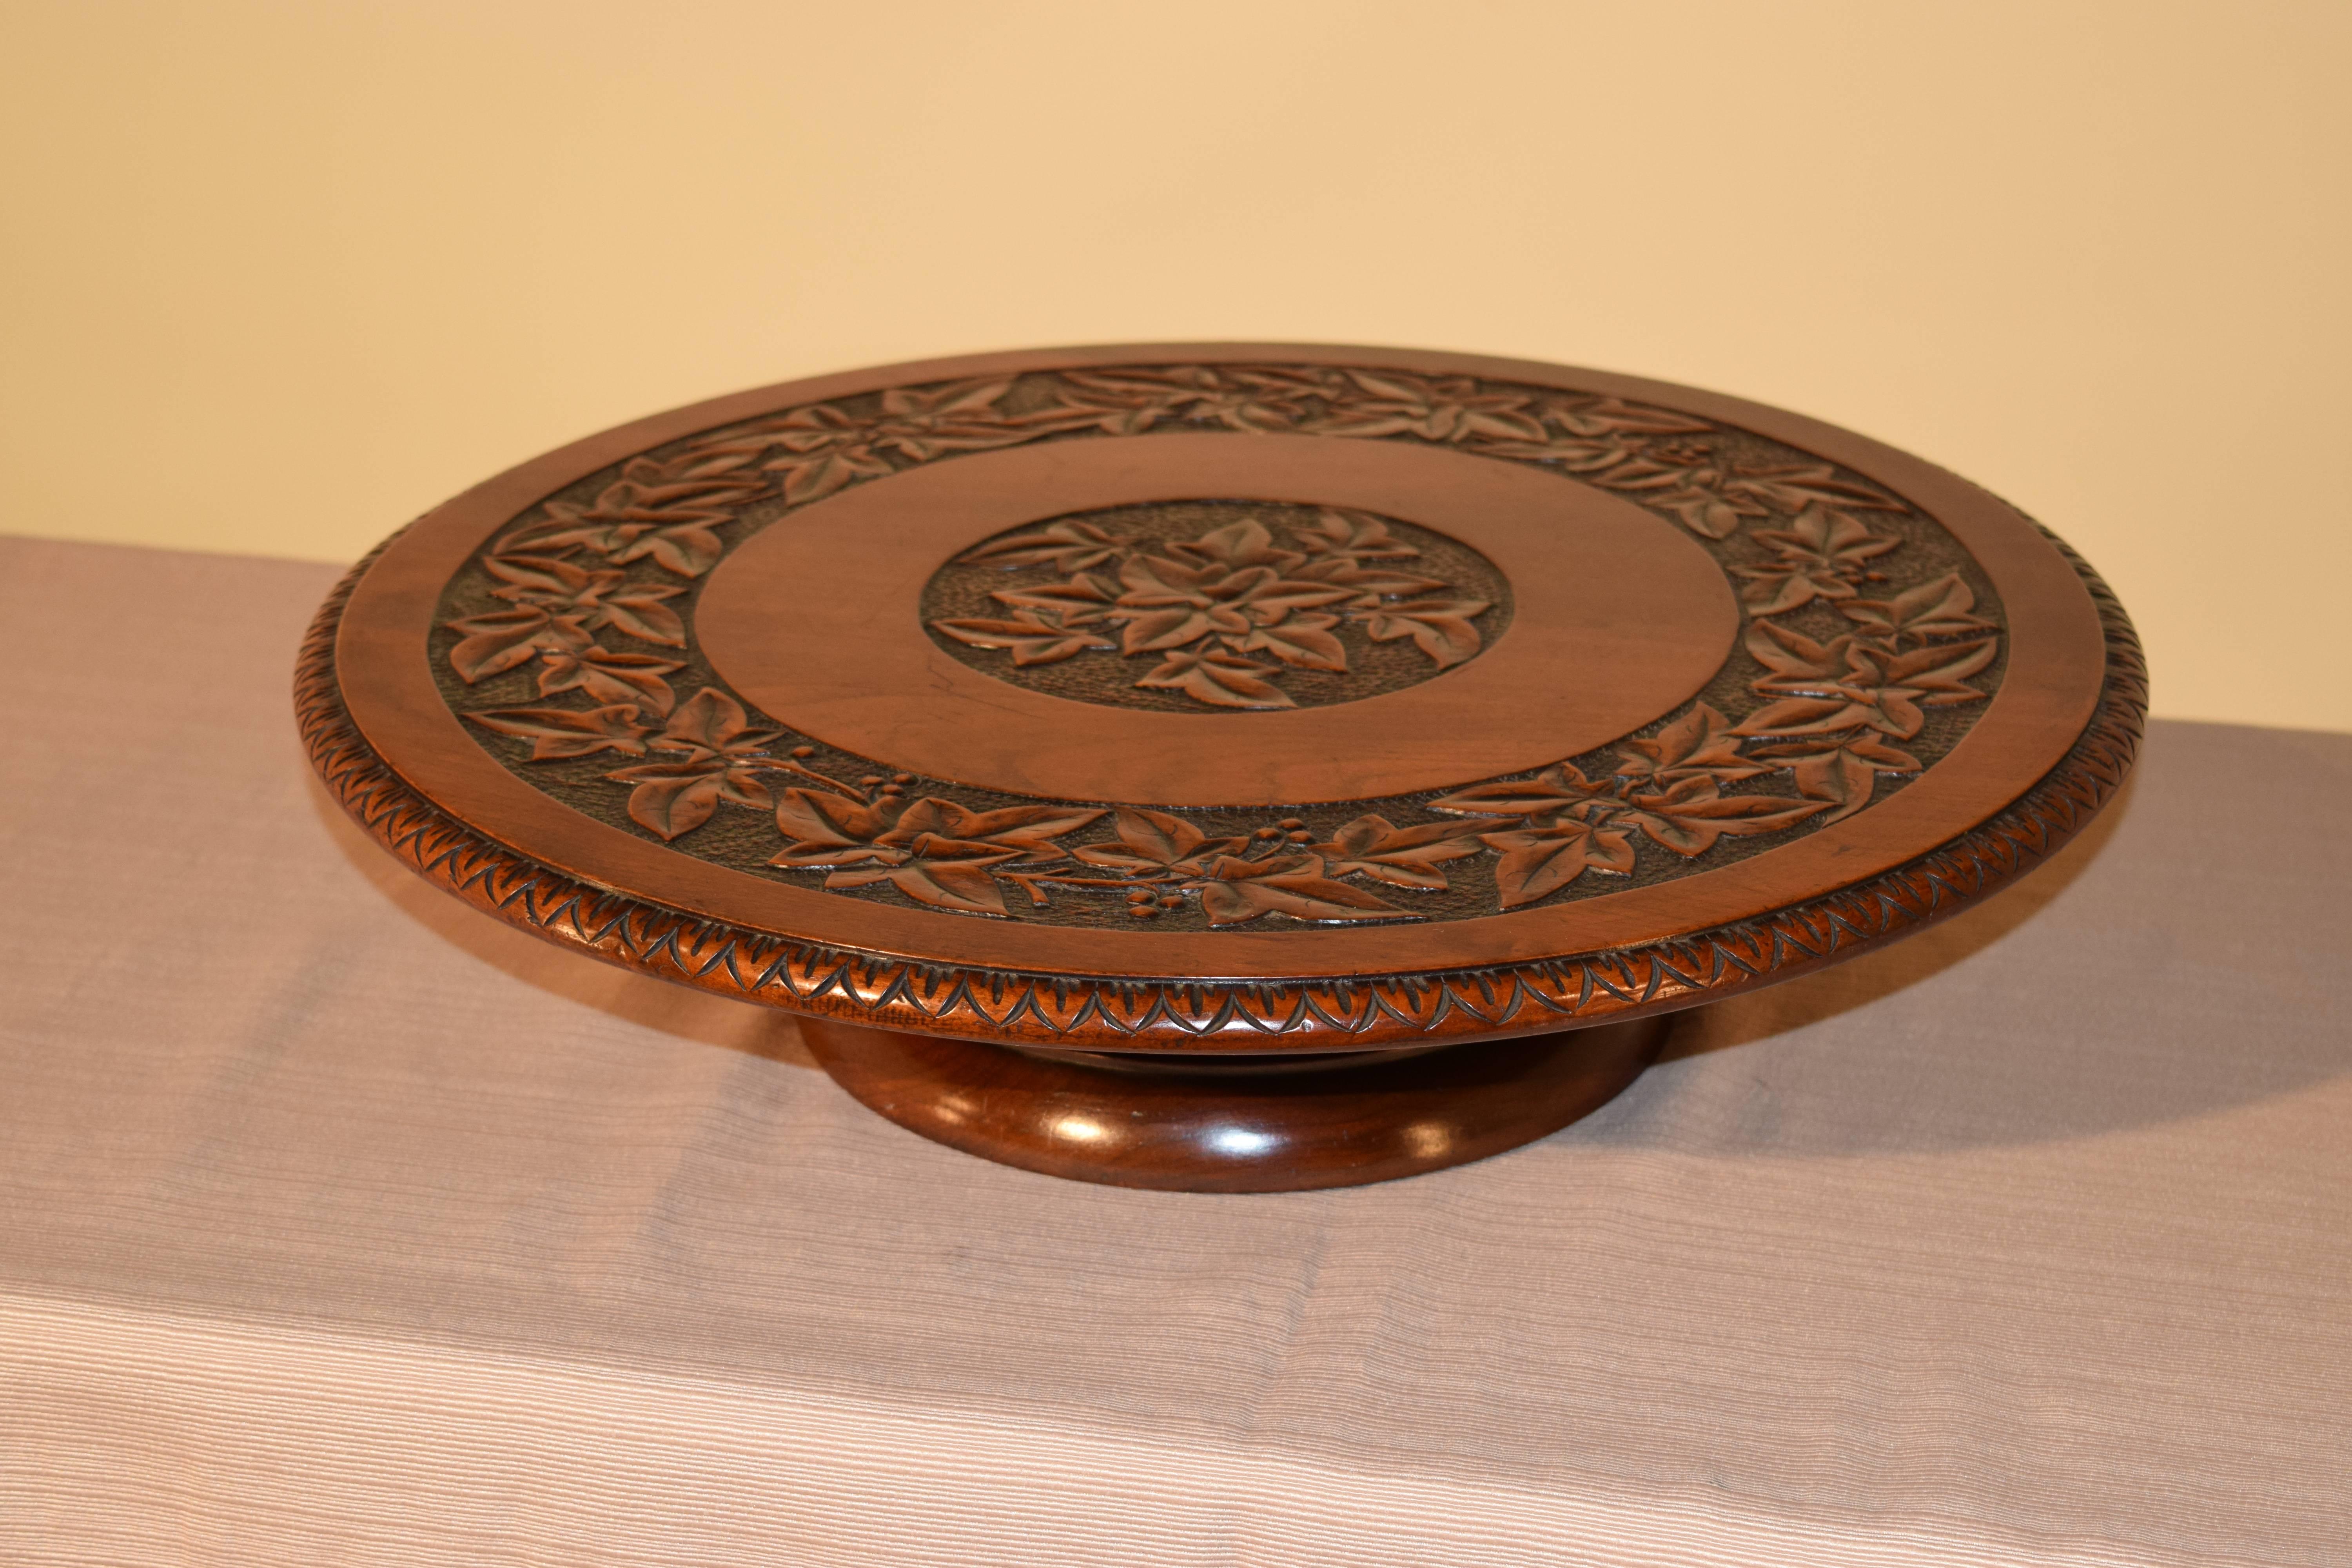 19th Century lazy Susan made from Mahogany. The top is carved with a central medallion and a band around the edge depicting leaves. The edge of the top is beveled and carved decorated as well. It is supported on a hand turned base.